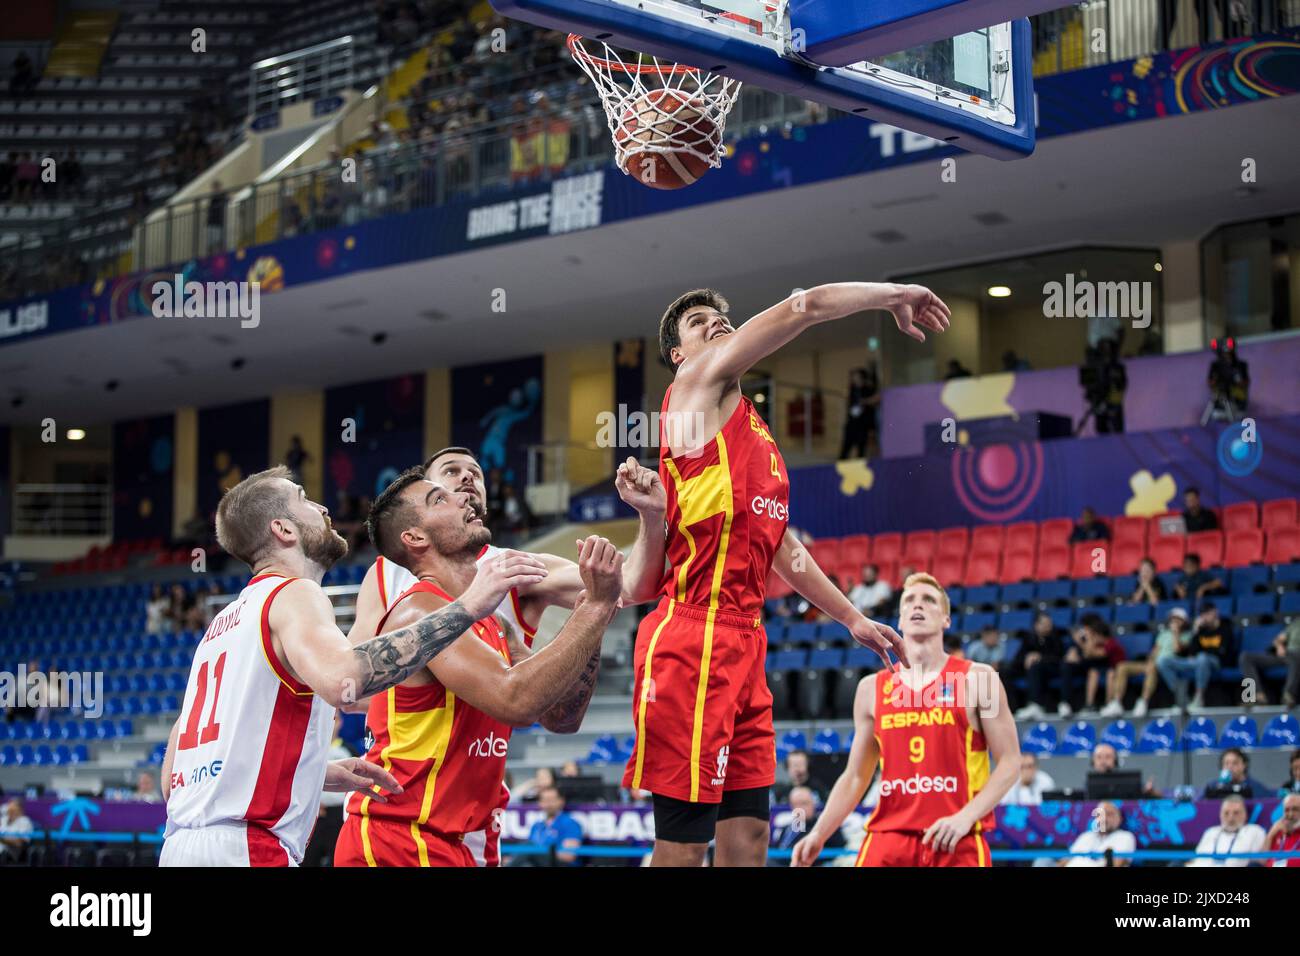 Tbilisi, Georgia, 6th September 2022. Jaime Pradilla of Spain, Willy Hernangomze of Spain in action under the basket during the FIBA EuroBasket 2022 group A match between Montenegro and Spain at Tbilisi Arena in Tbilisi, Georgia. September 6, 2022. Credit: Nikola Krstic/Alamy Stock Photo